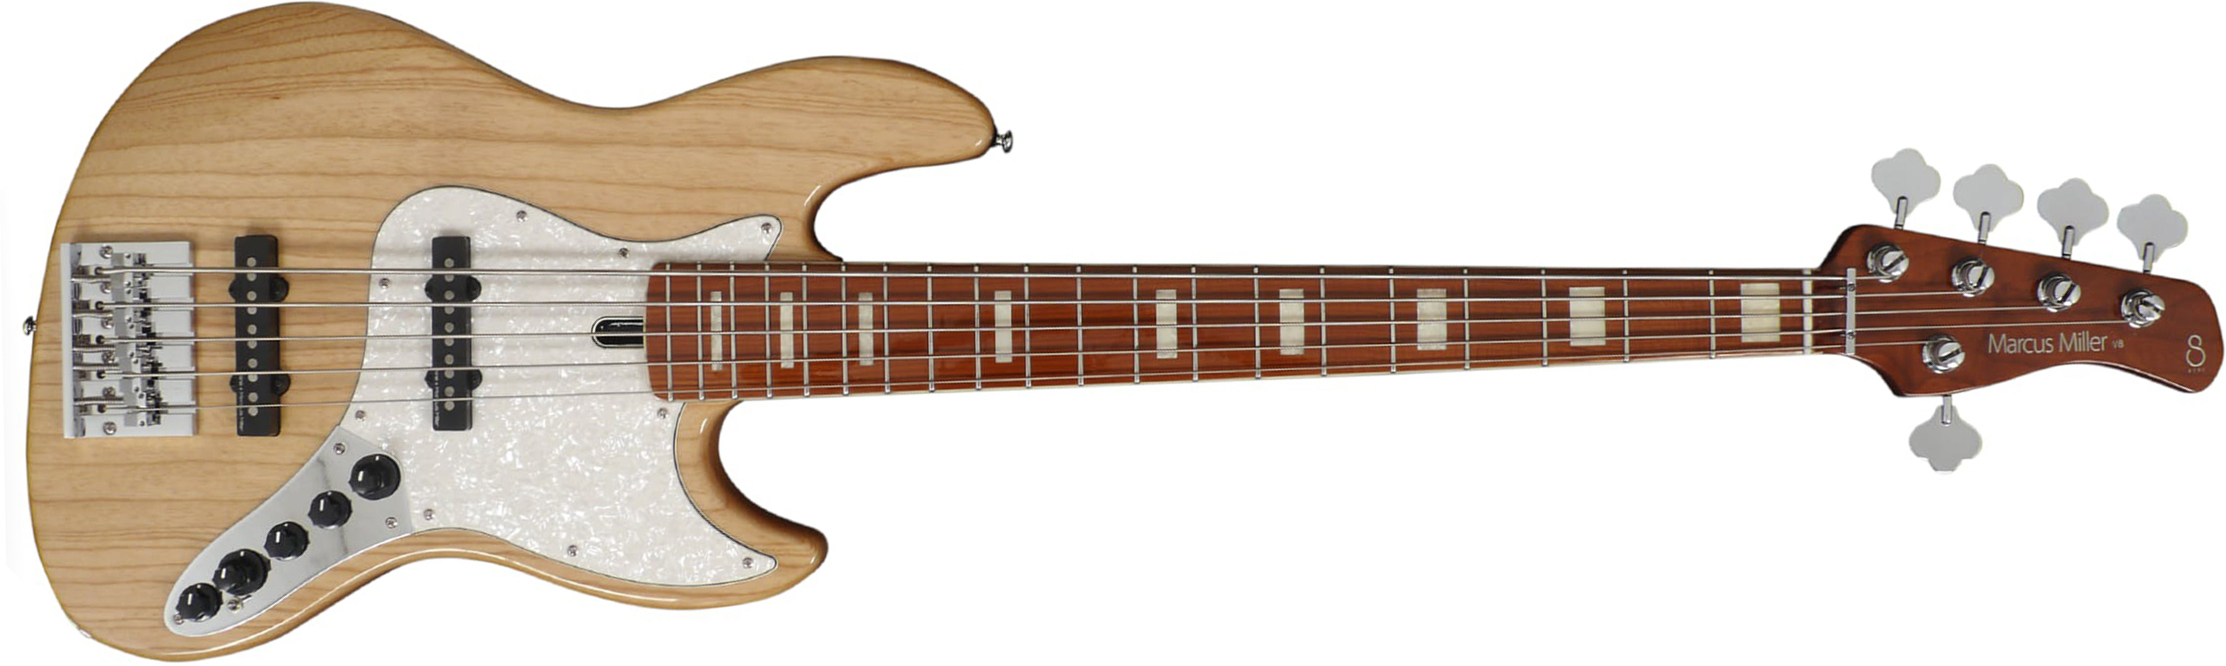 Marcus Miller V8 5st 5c Active Mn - Natural - Solid body electric bass - Main picture